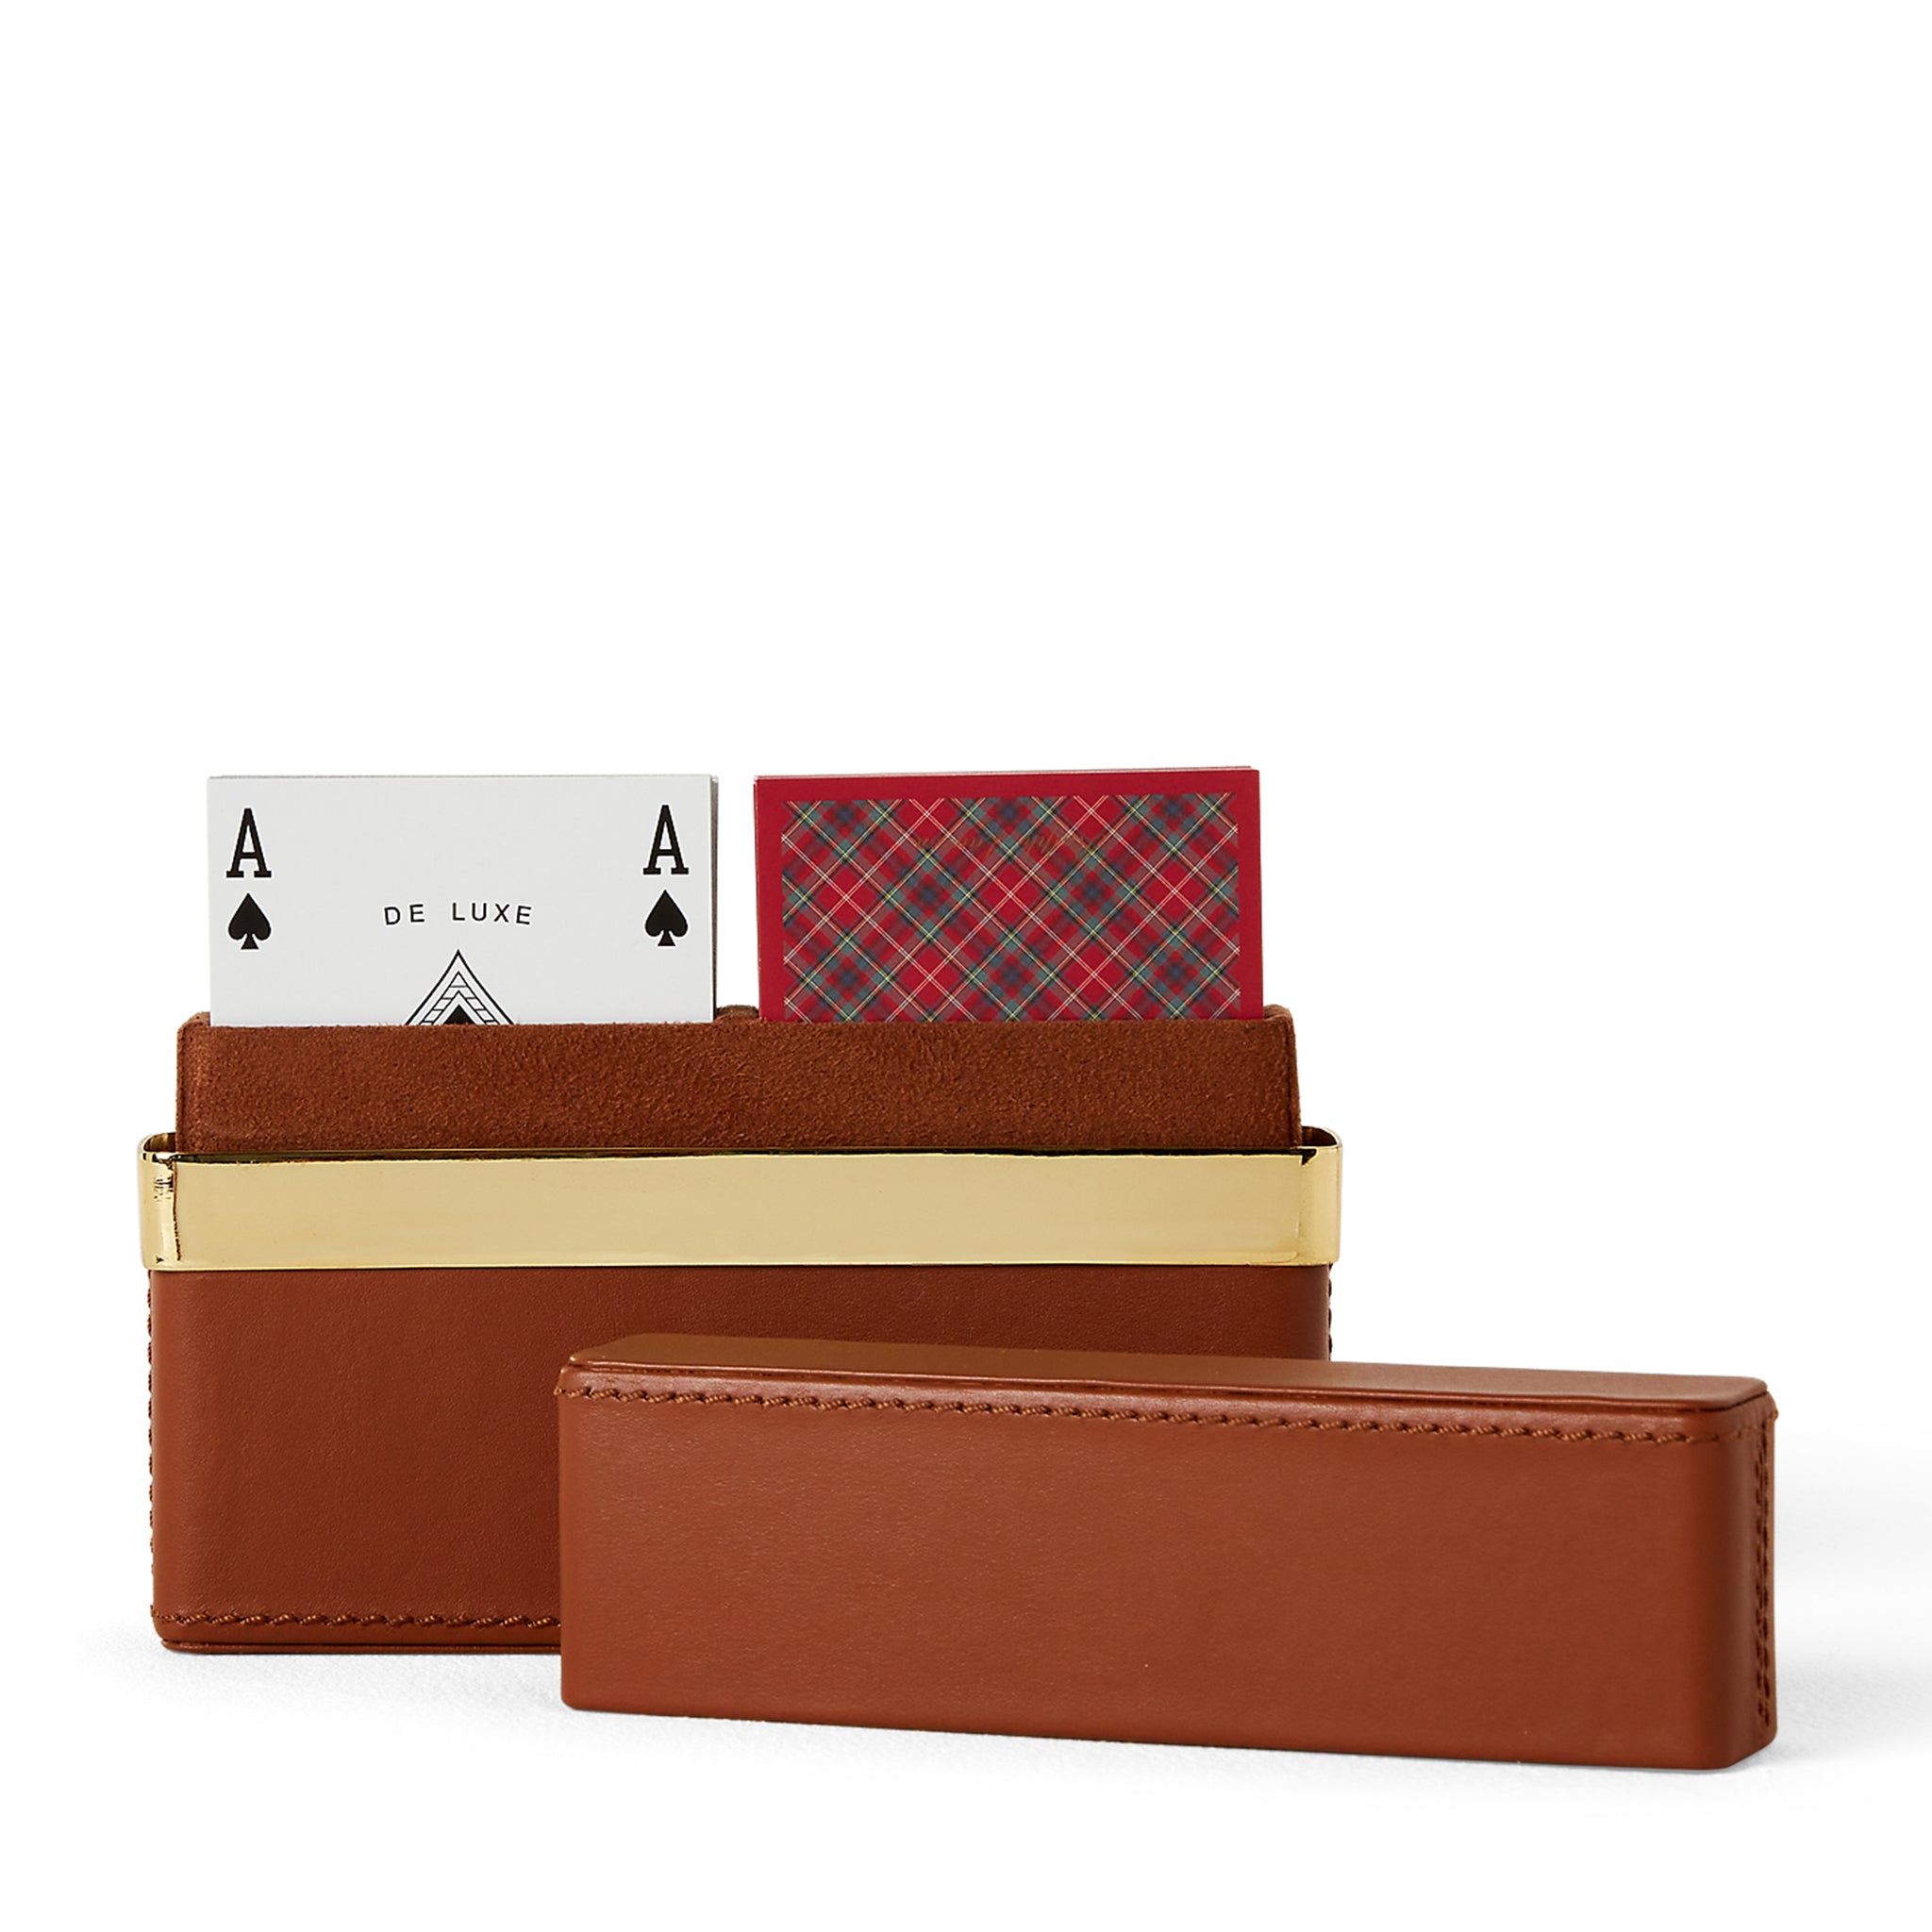 ralph lauren westover playing card set home accessories 